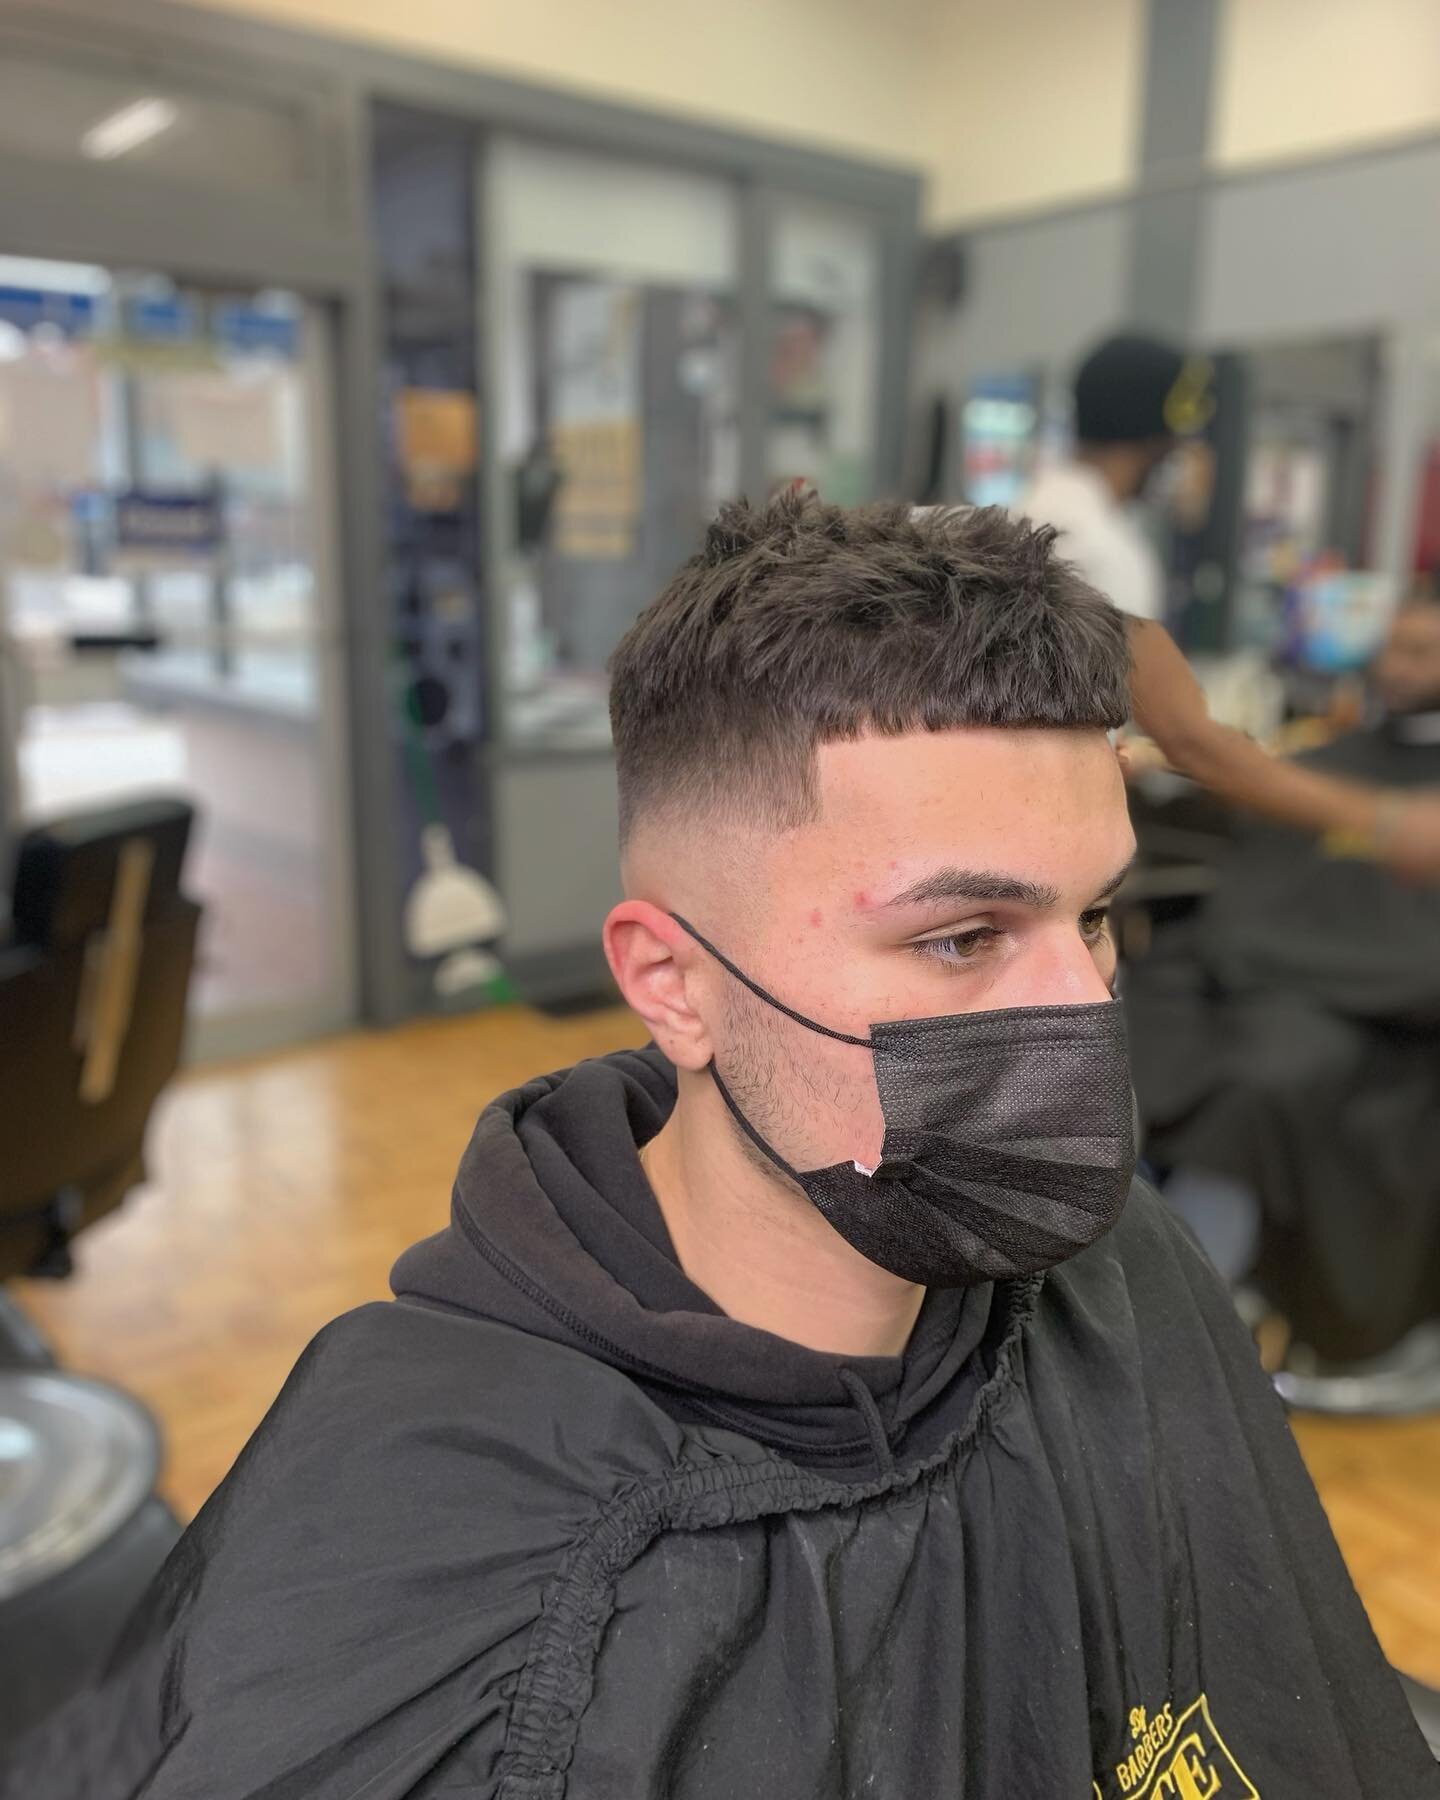 Everything thing feels better after a  haircut 

📸 &amp; cut by @ricothebarber216 

#hair #haircut #hairstyle #barber #barbershop #barberlife #barbershopconnect #barbering #fade #hanzonation #nastybarbers #sharpfade #clevelandbarbers #cleveland #cle